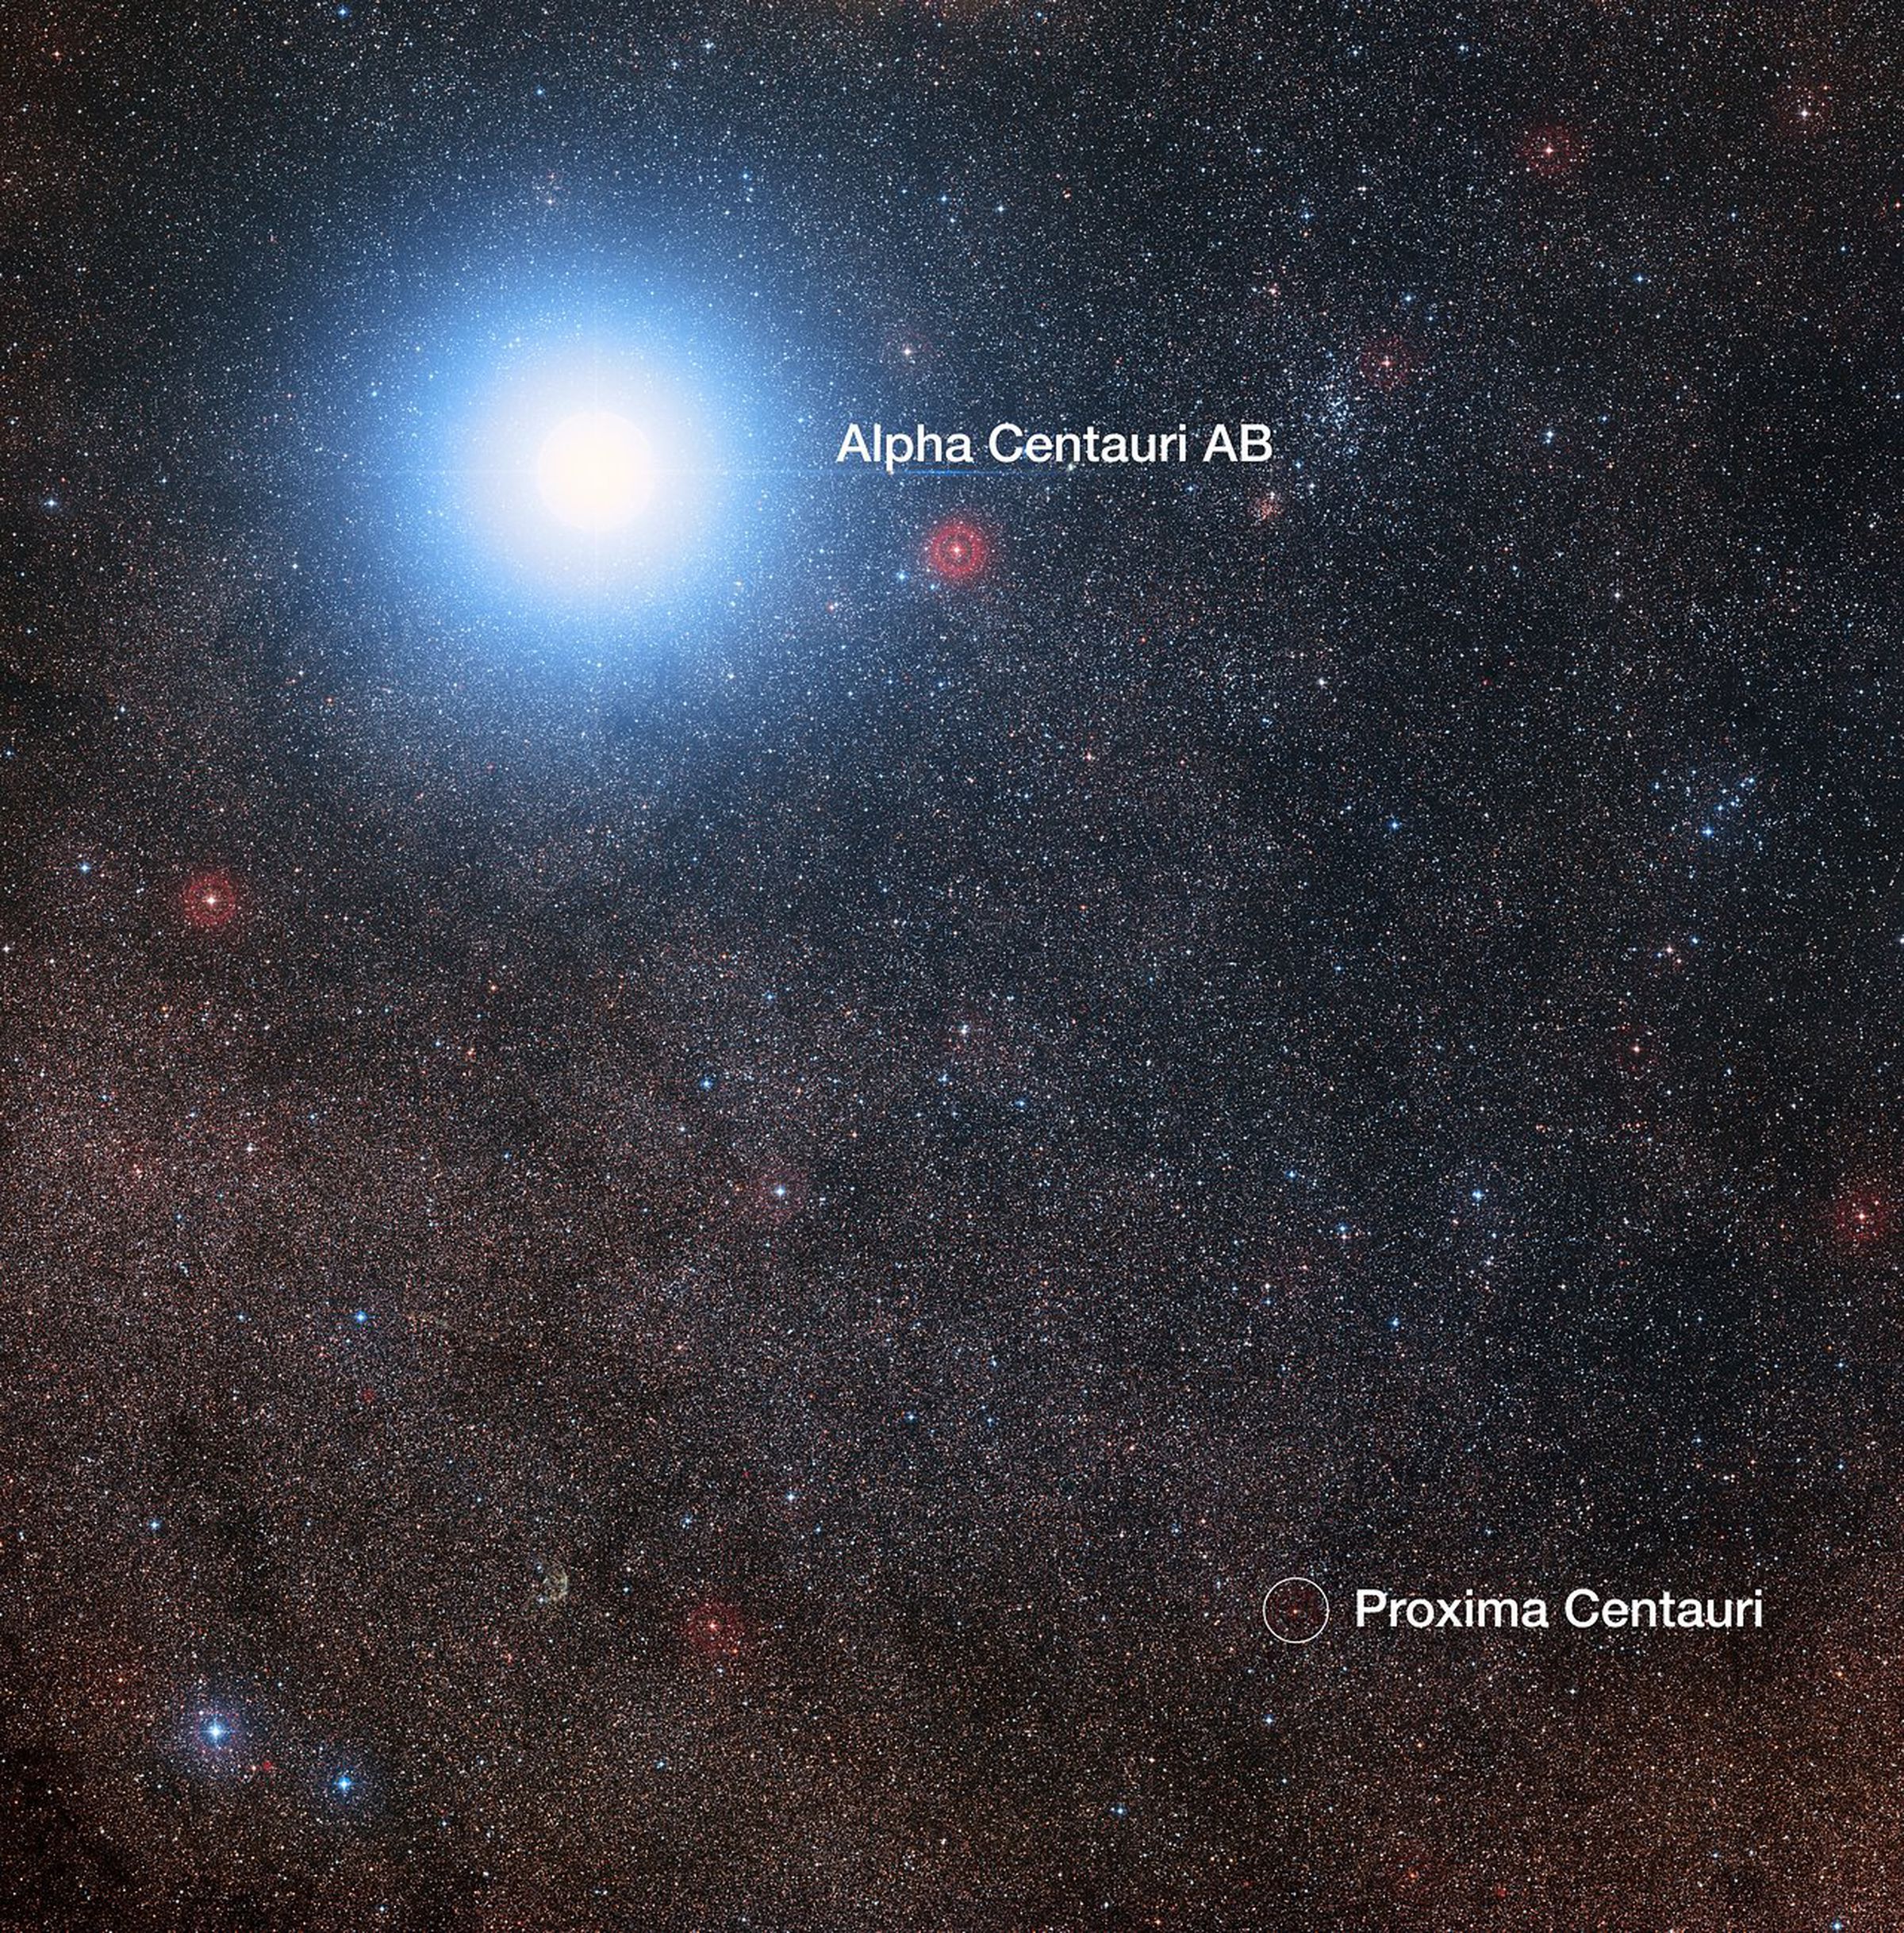 Proxima Centauri in the sky, along with Alpha Centauri A and B — the two other stars in the system.